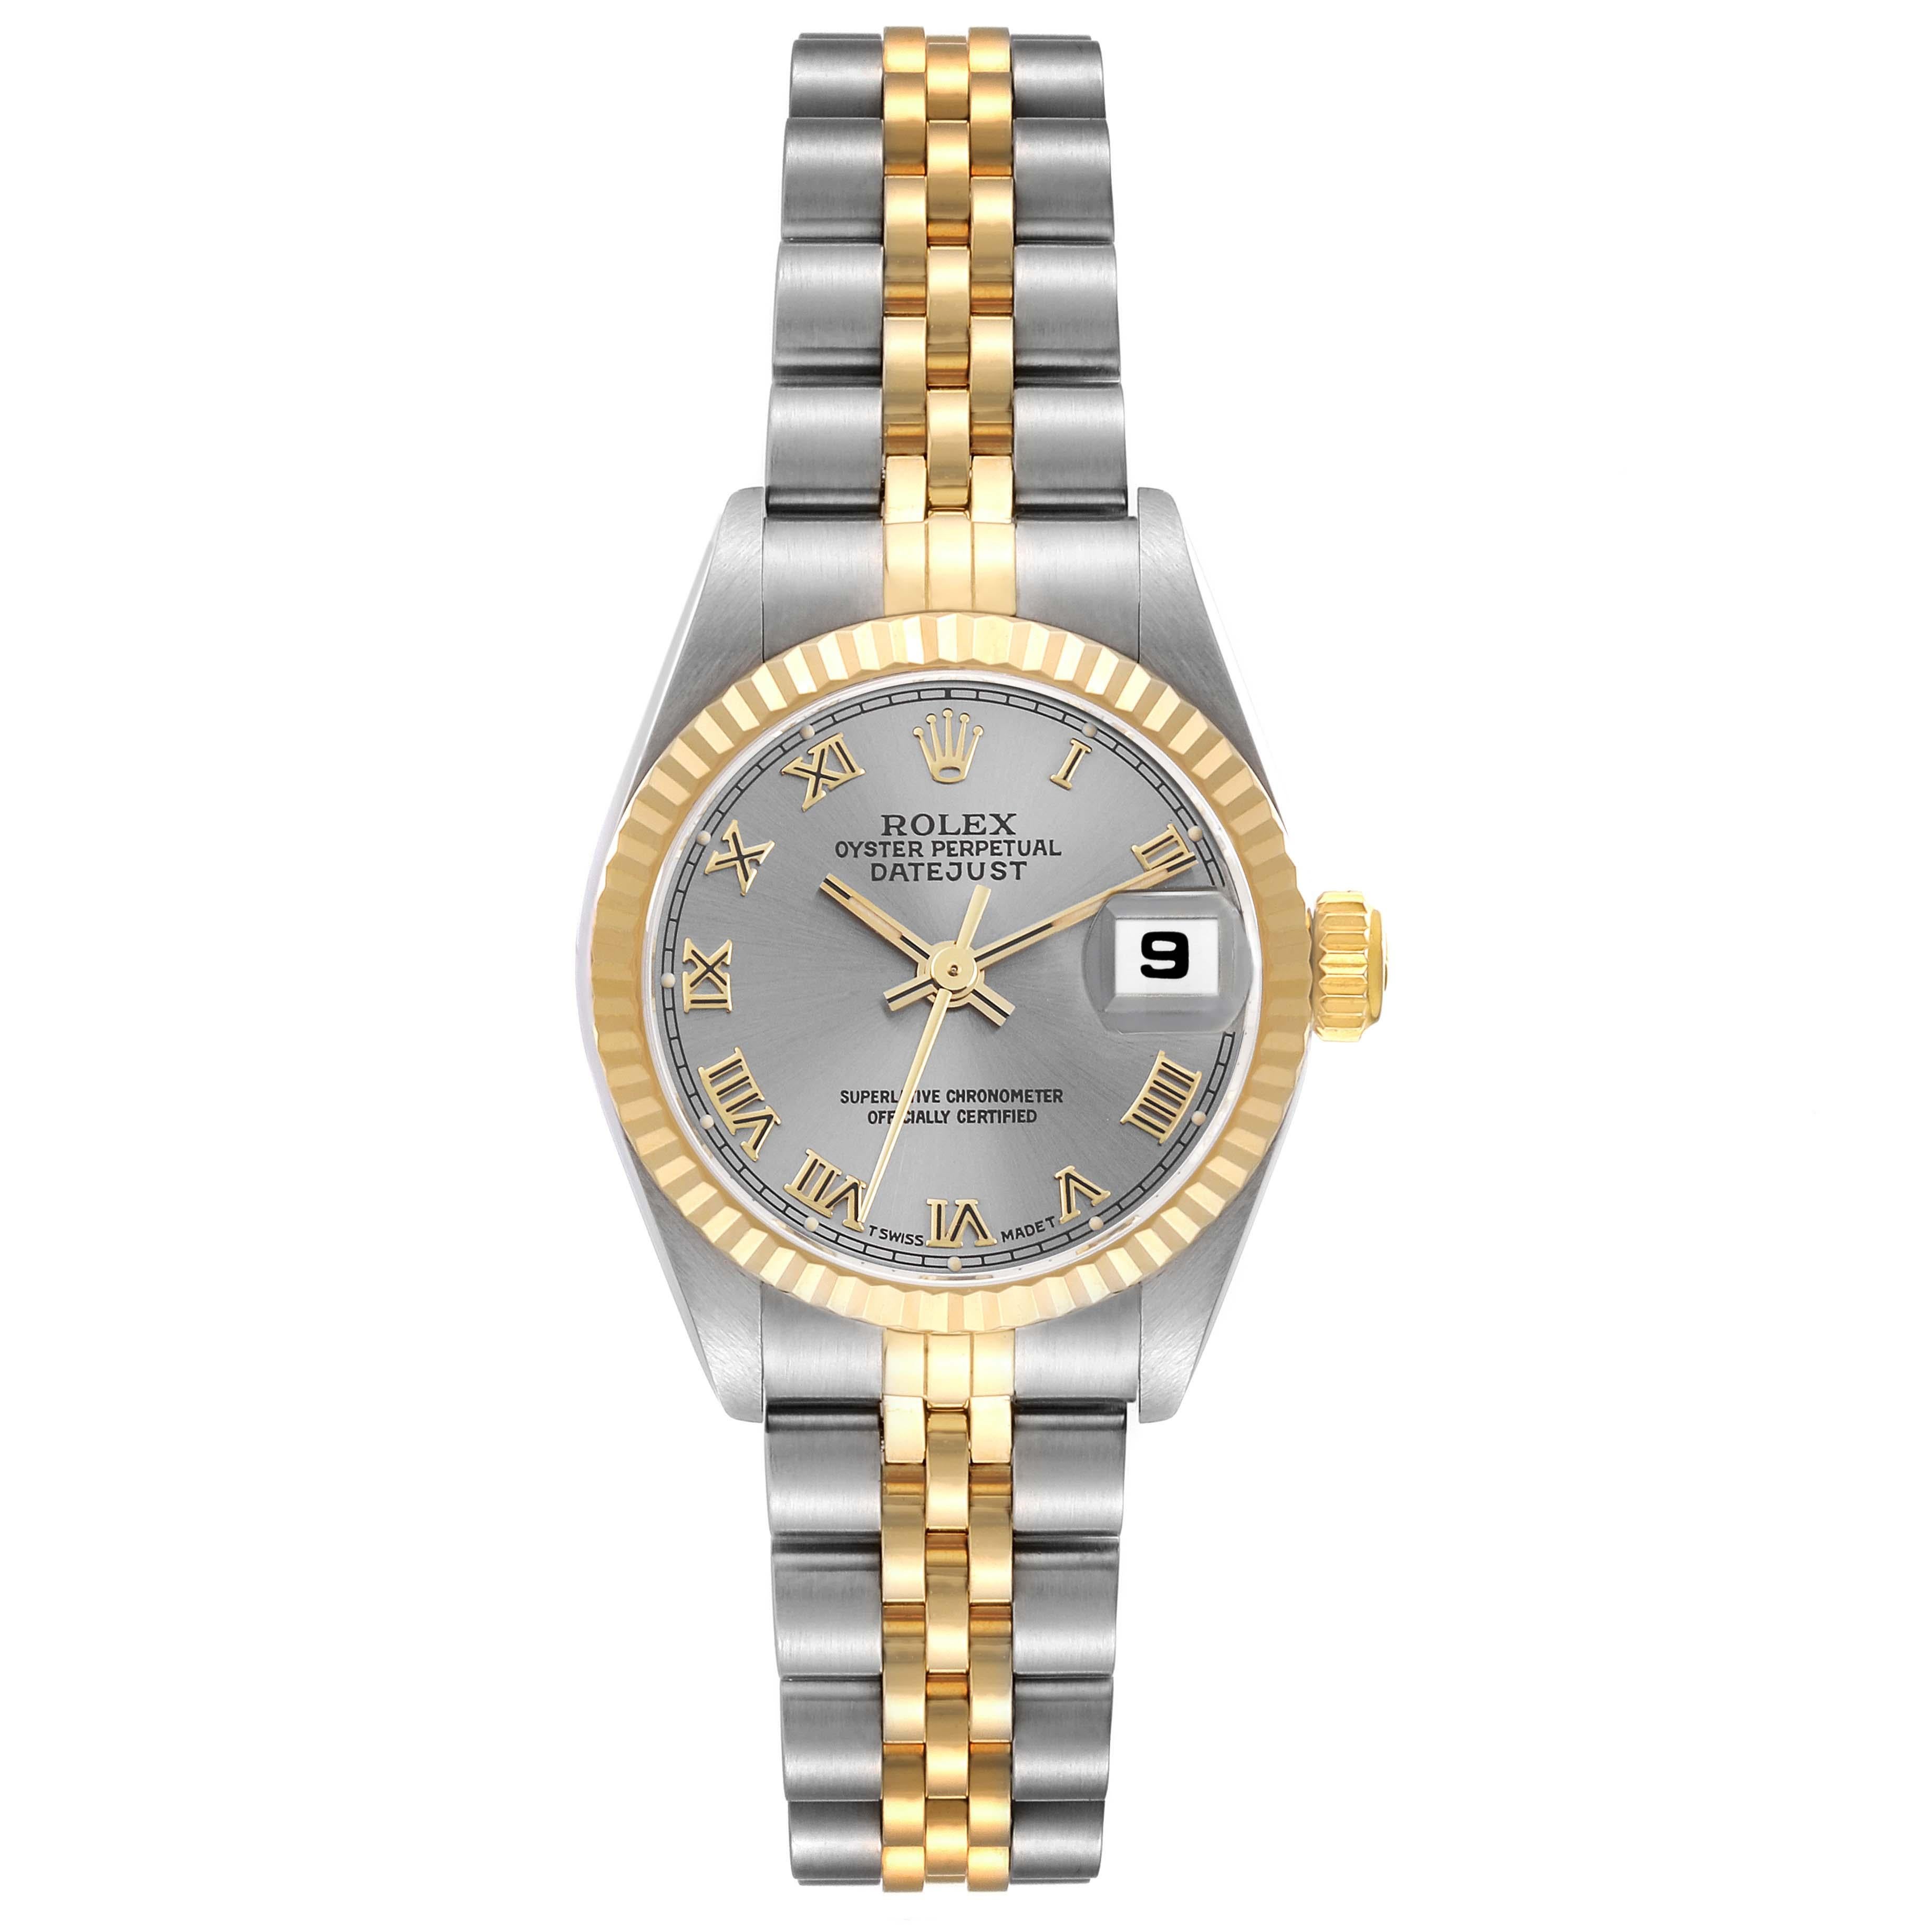 Rolex Datejust Slate Dial Steel Yellow Gold Ladies Watch 69173 Papers. Officially certified chronometer automatic self-winding movement. Stainless steel oyster case 26.0 mm in diameter. Rolex logo on the crown. 18k yellow gold fluted bezel. Scratch